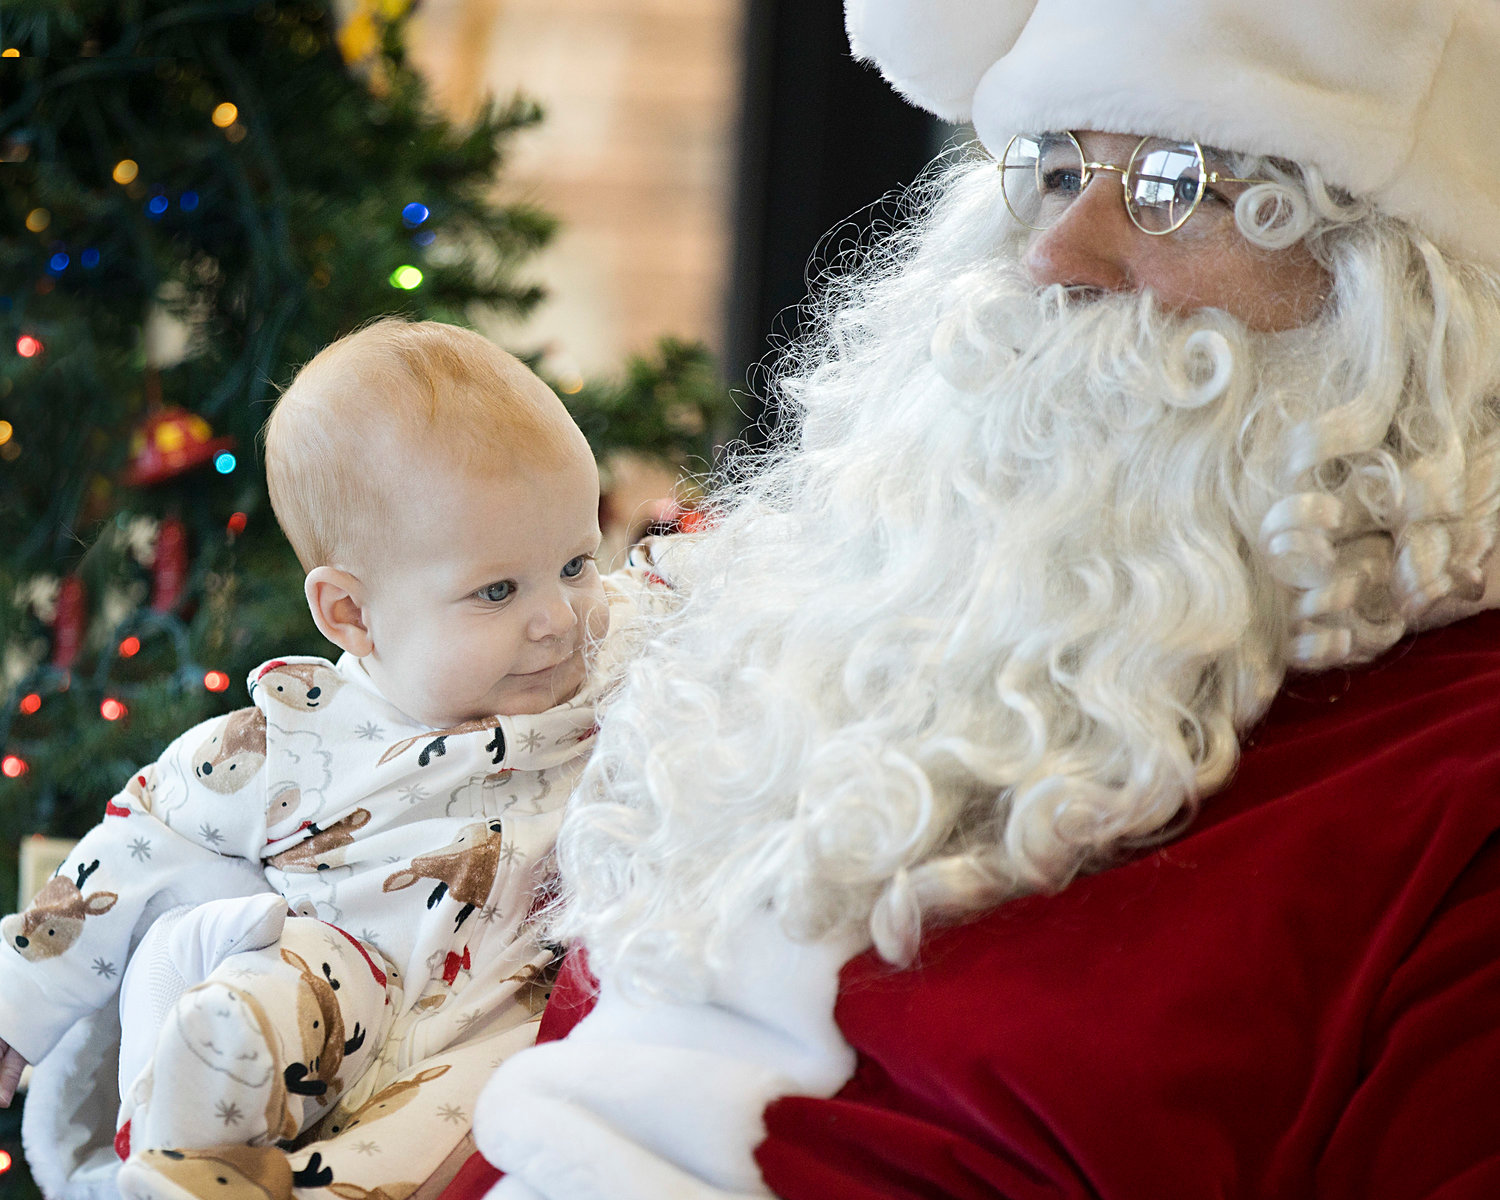 Kaylee McGuiness examines Santa's beard closely during Central Fire Company's "Breakfast with Santa" event, Sunday. 